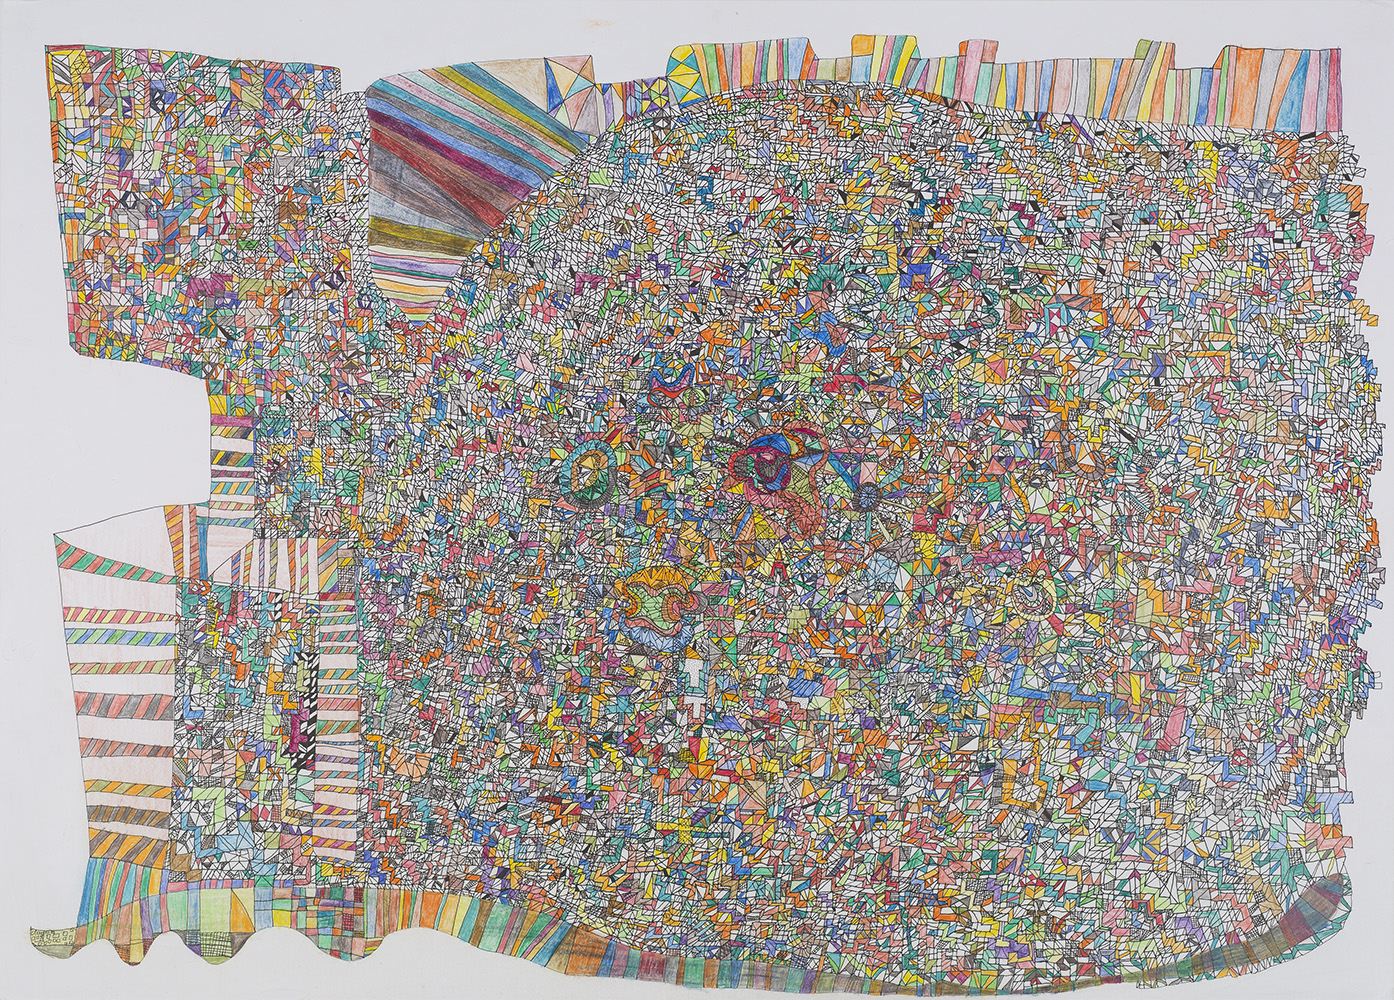   Paul Kai Schröder    Untitled  , 2014 Crayon and ink on paper 19.5 x 27.5 inches 49.5 x 69.9 cm PKS 1 